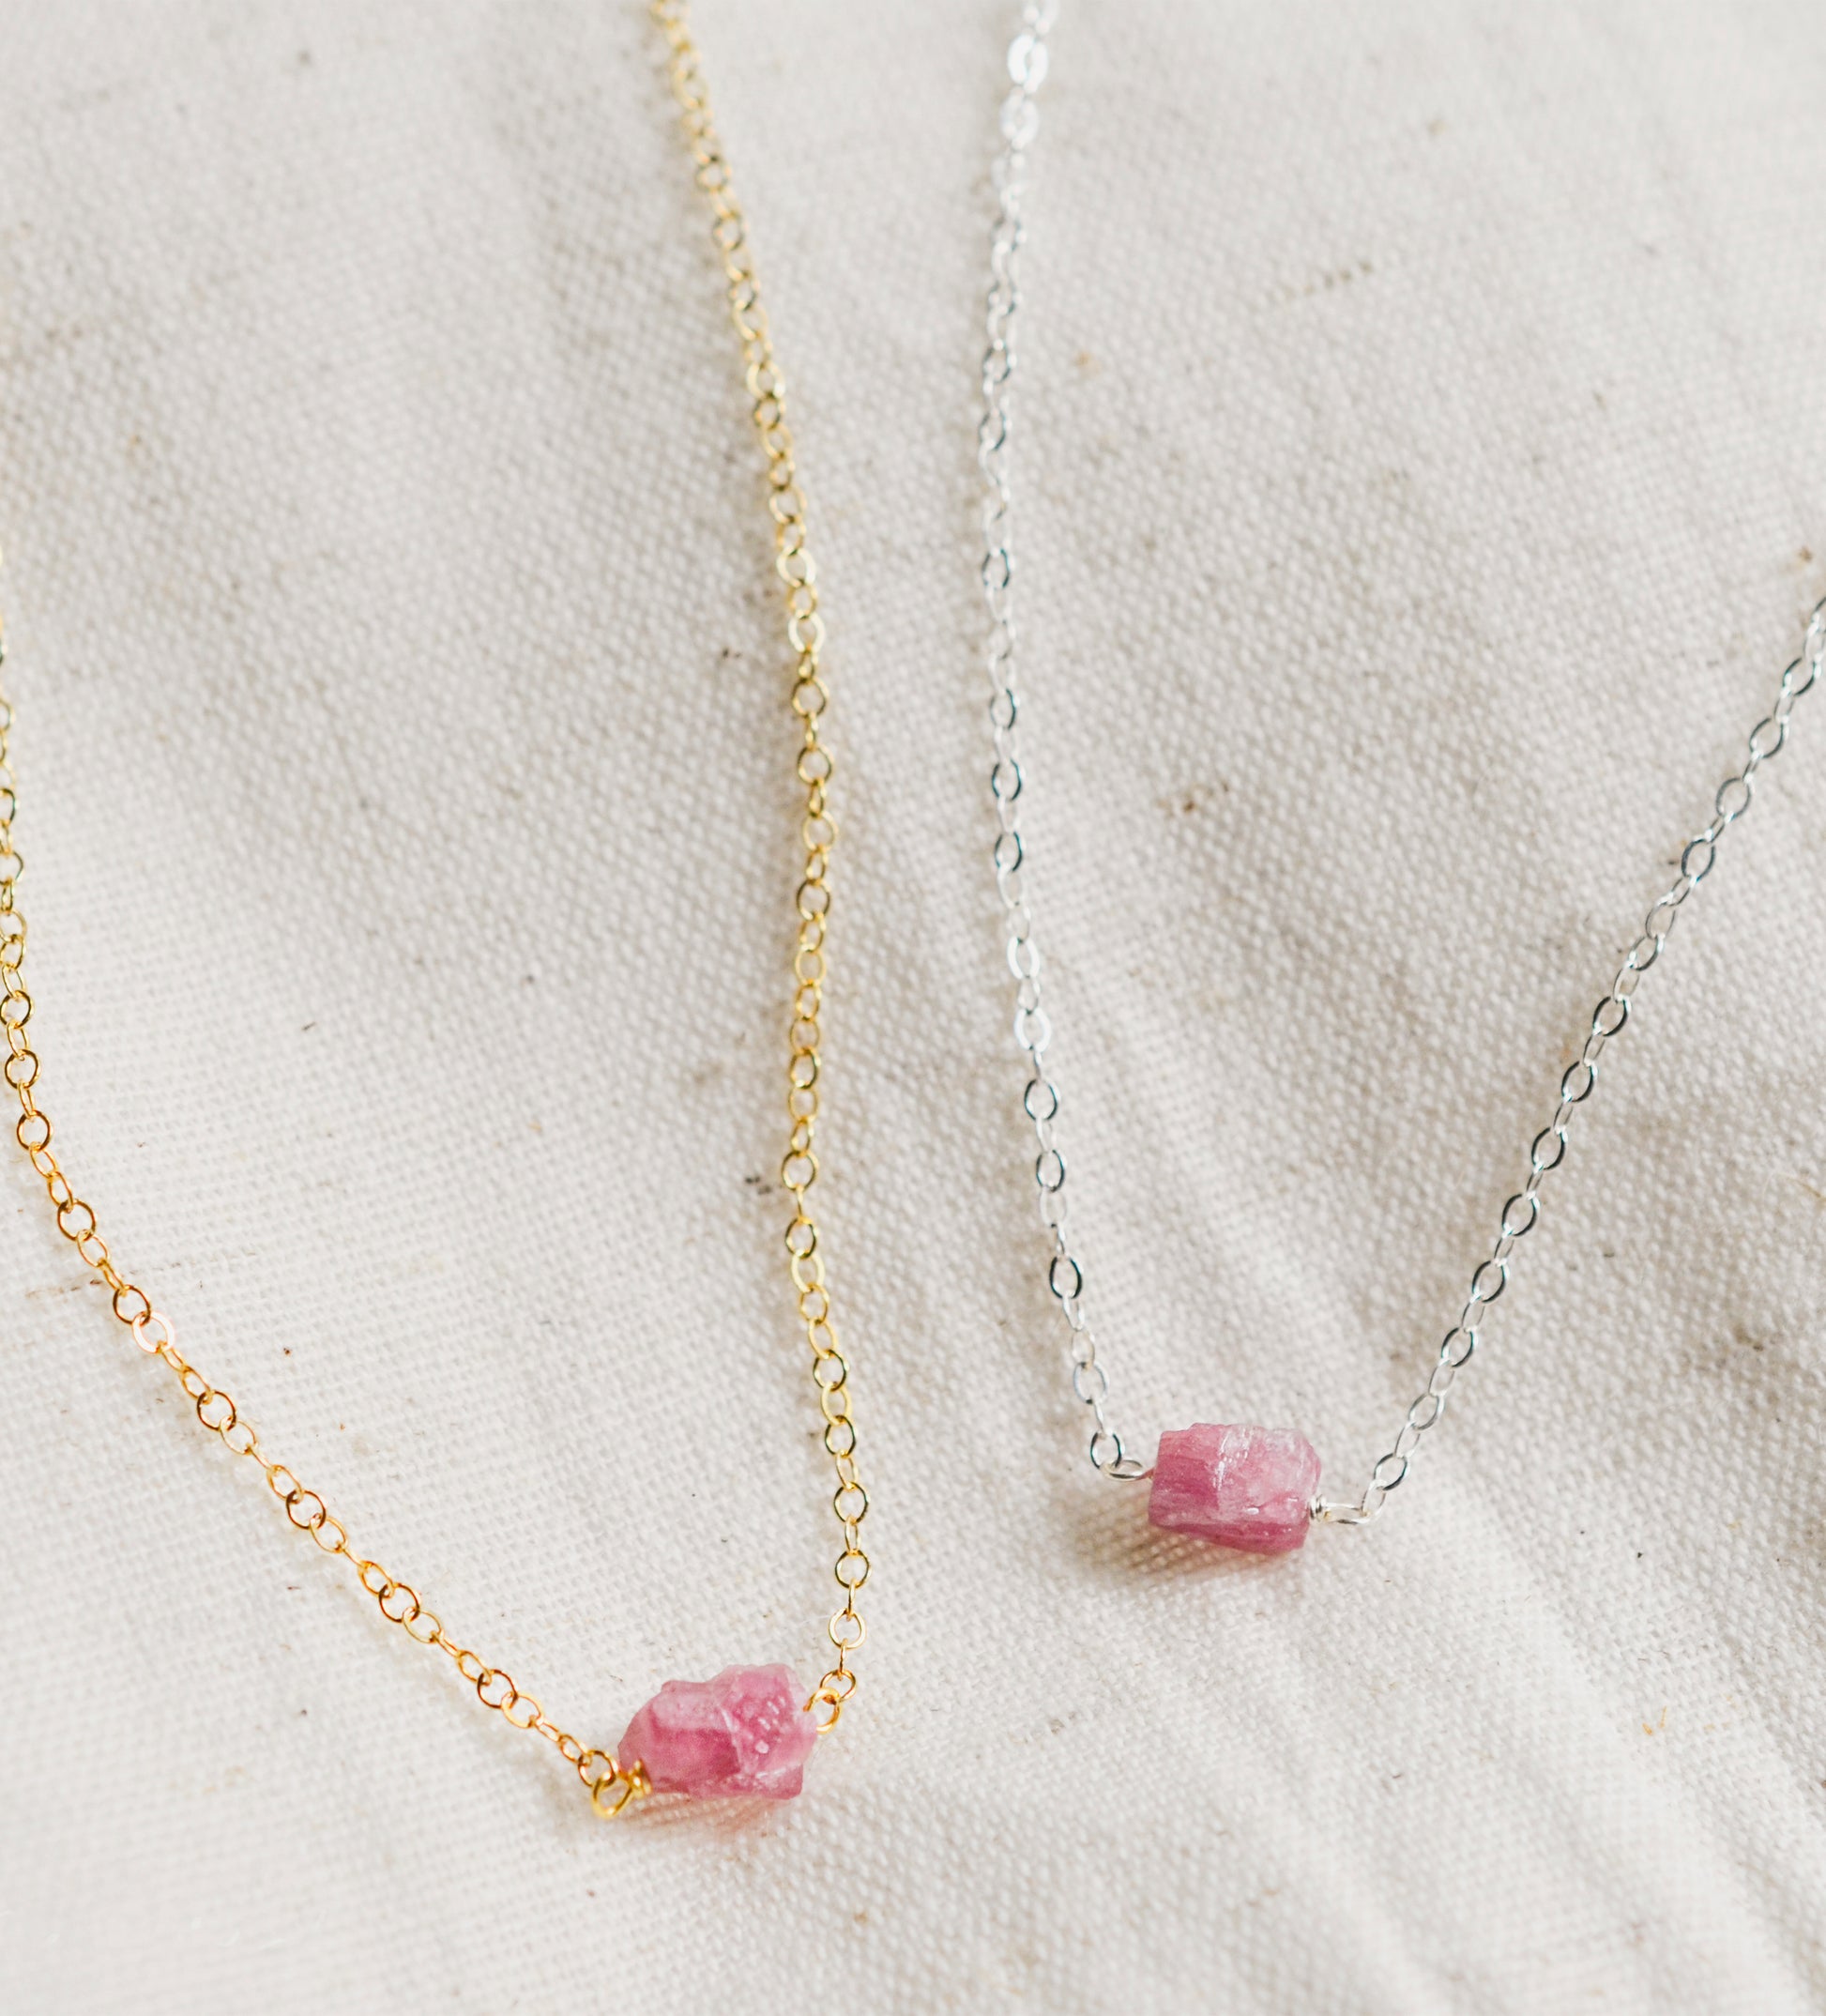 Small natural pink tourmaline crystal set onto a sterling silver or 14k gold filled chain. 